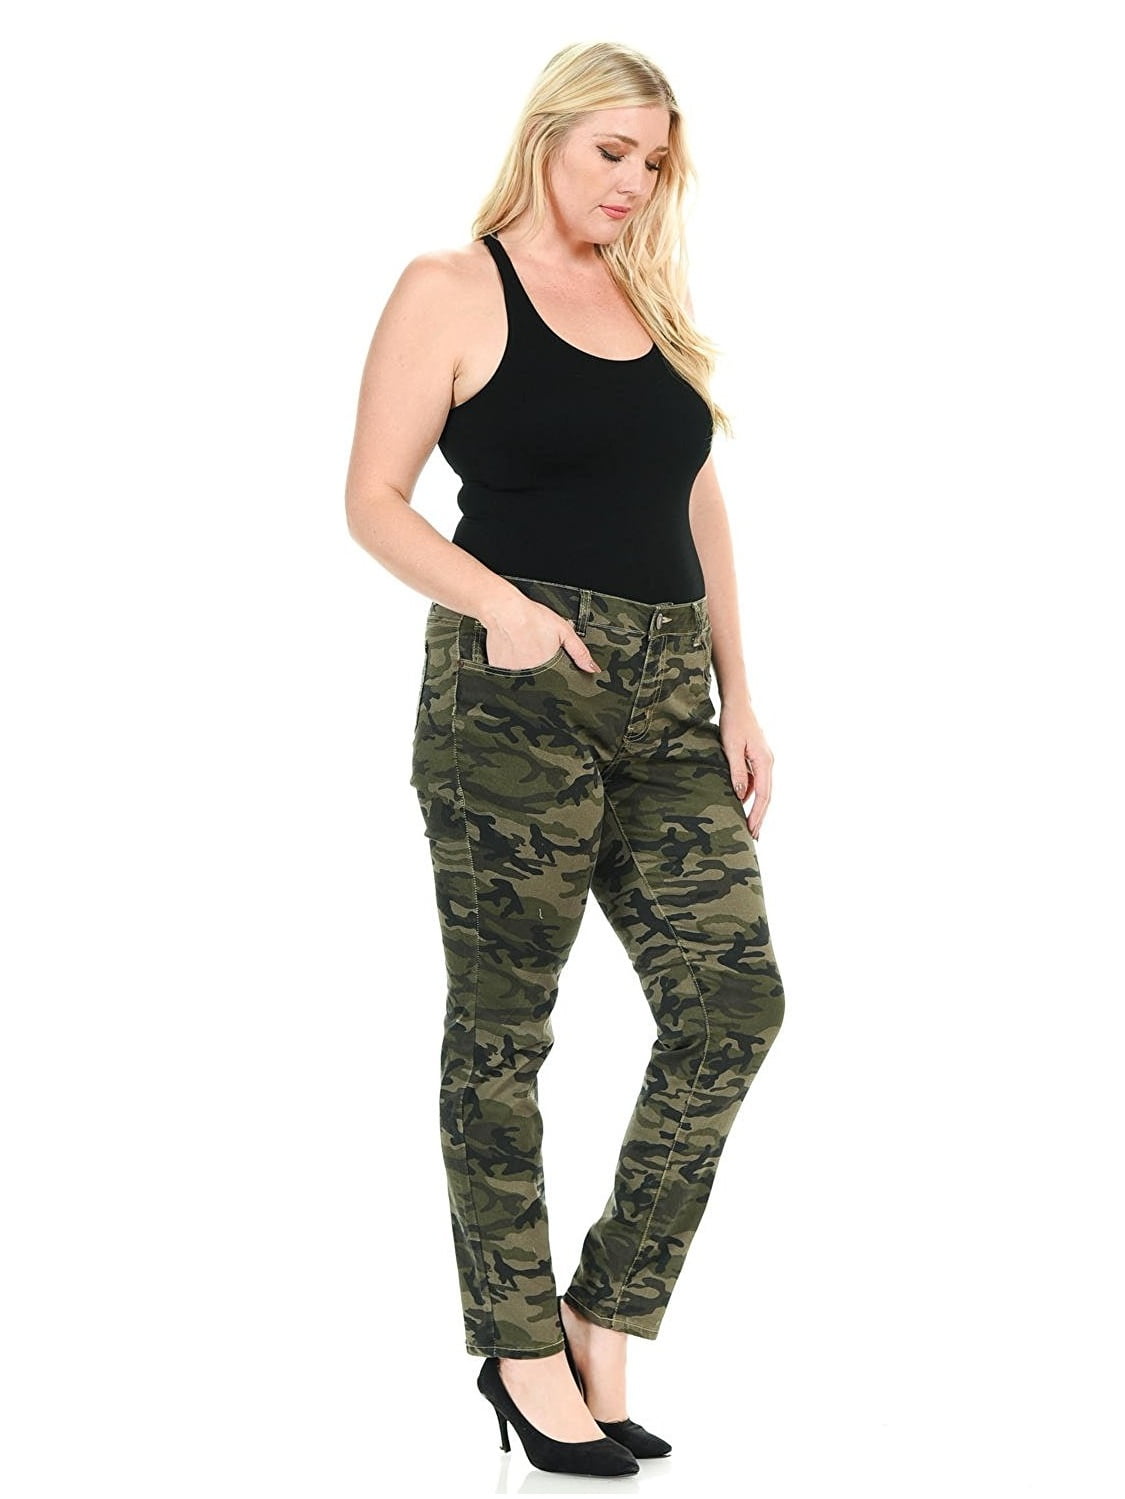 New American Eagle Army Camo Jeans Womens Size 00 High Rise Green Jegging  Pants  Inox Wind